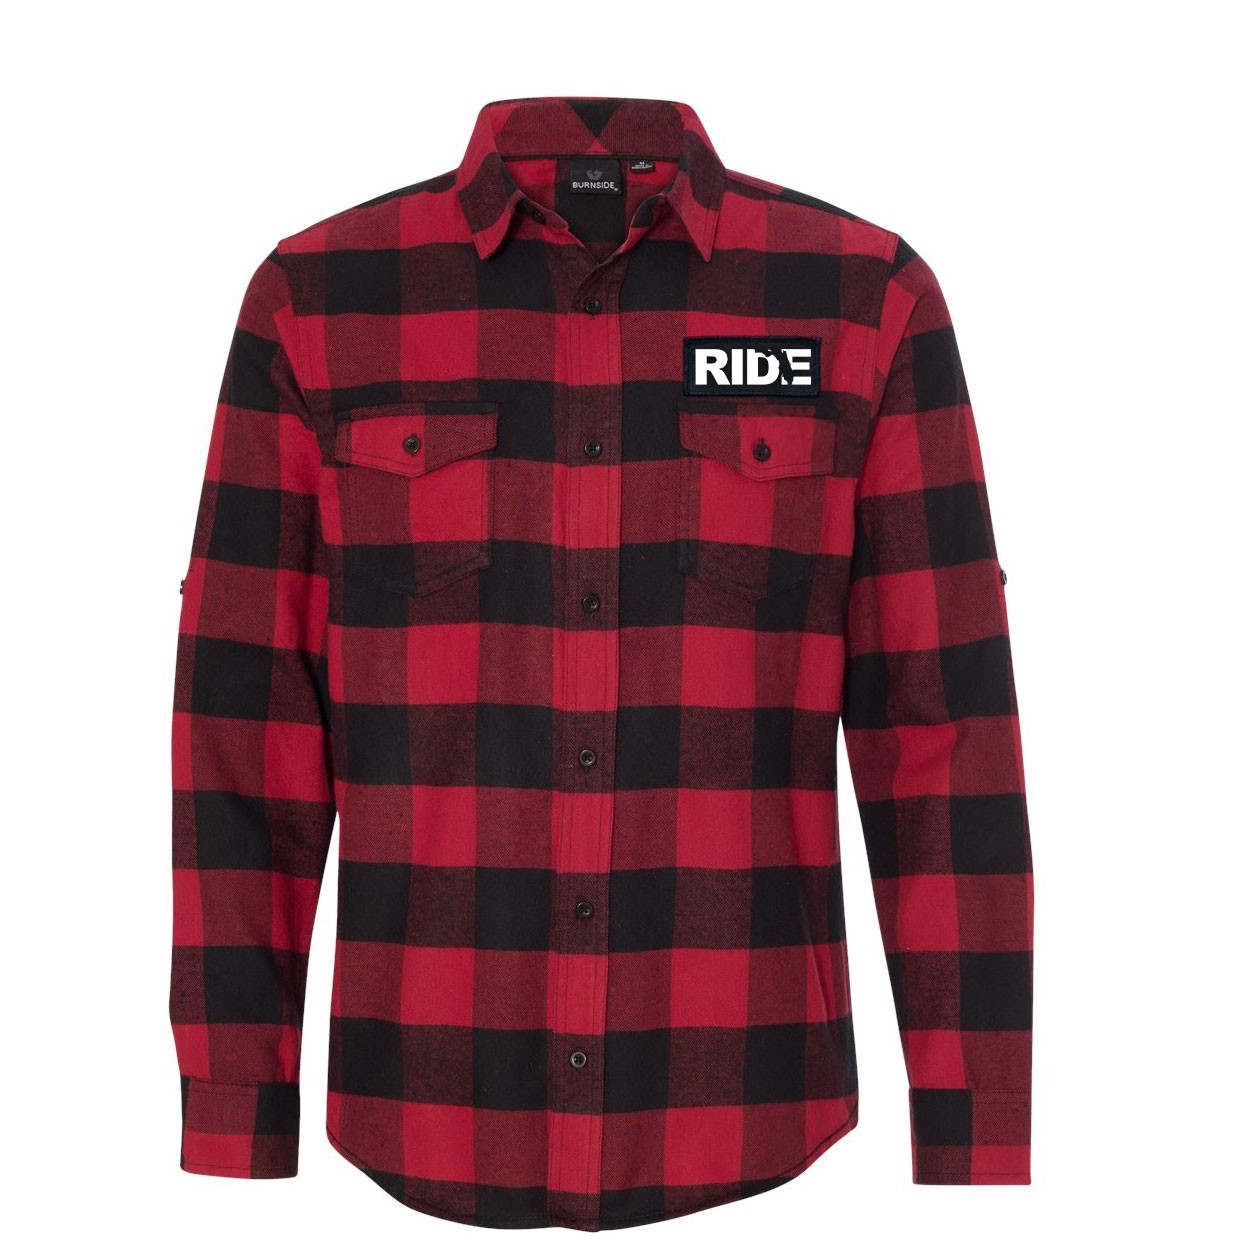 Ride Florida Classic Unisex Long Sleeve Woven Patch Flannel Shirt Red/Black Buffalo (White Logo)